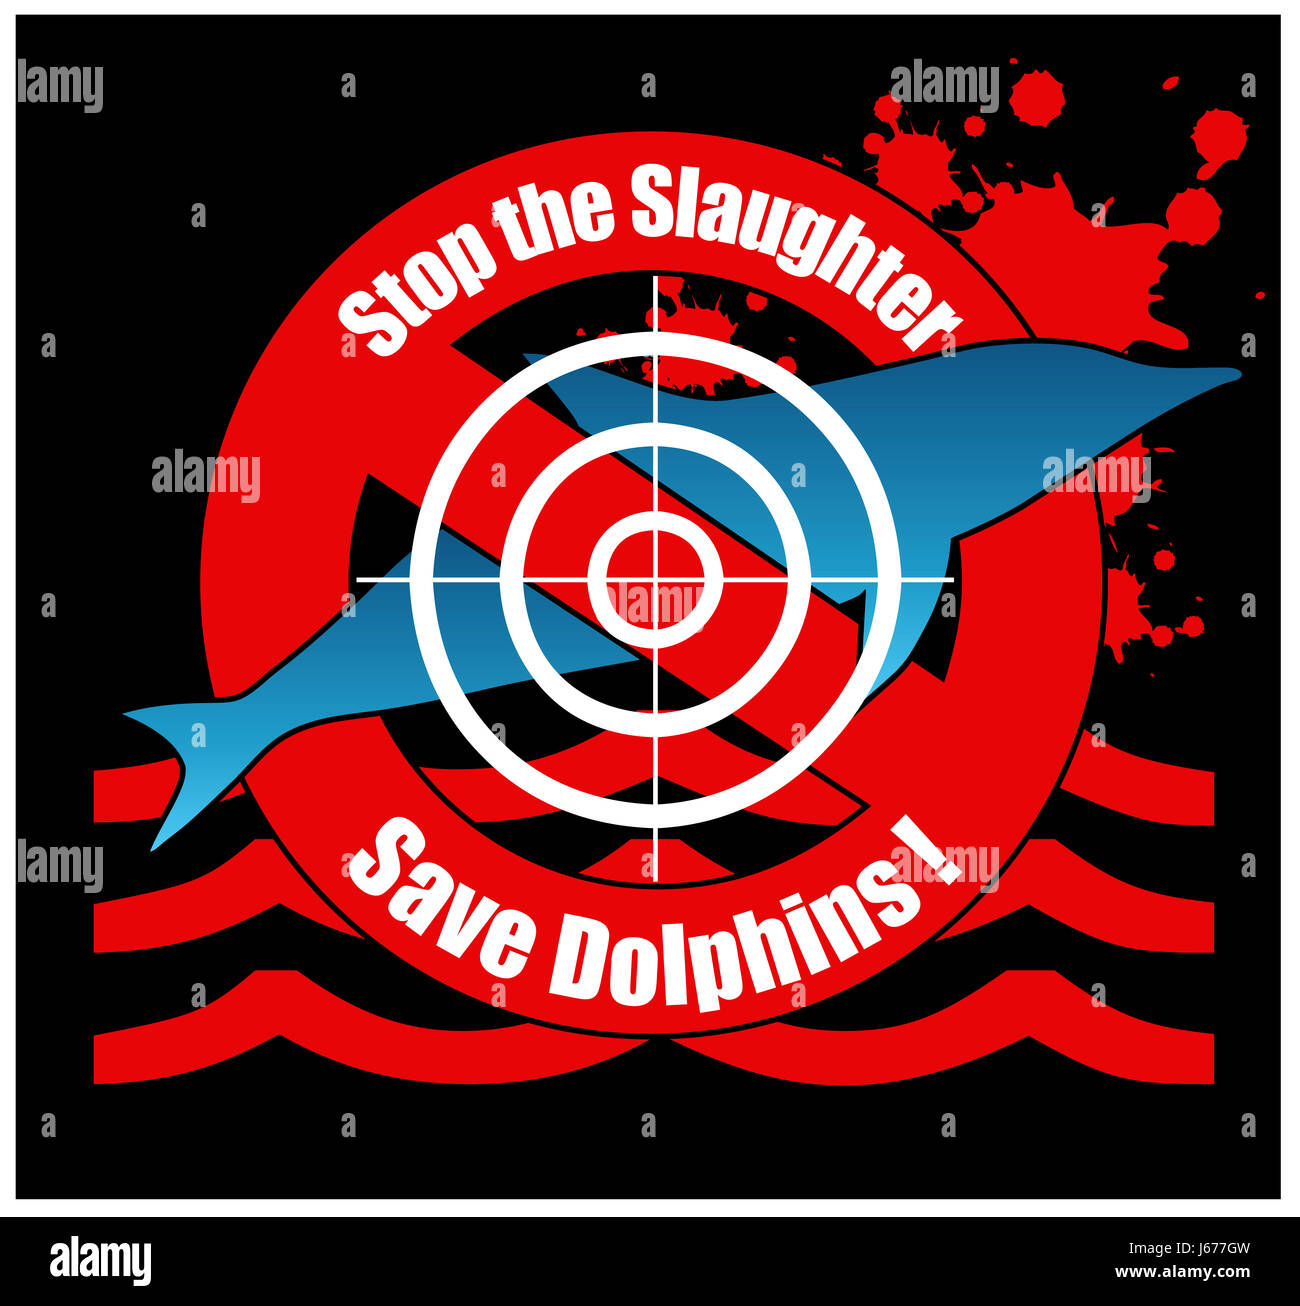 Save the dolphins, stop the slaughter Stock Photo